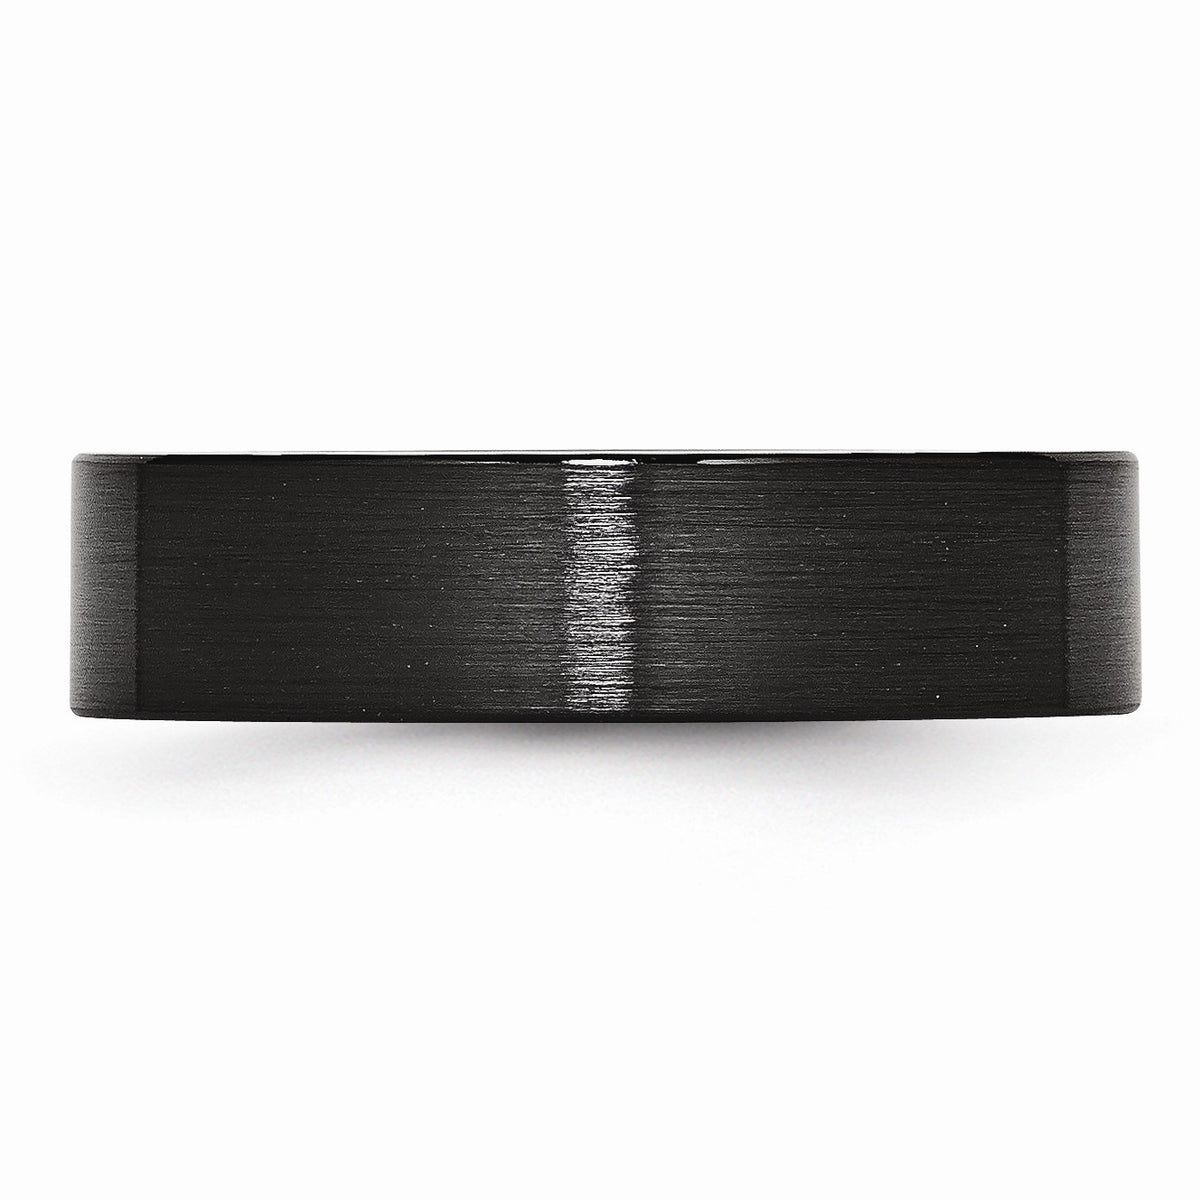 Alternate view of the Black Ceramic, 6mm Flat Brushed Comfort Fit Band by The Black Bow Jewelry Co.